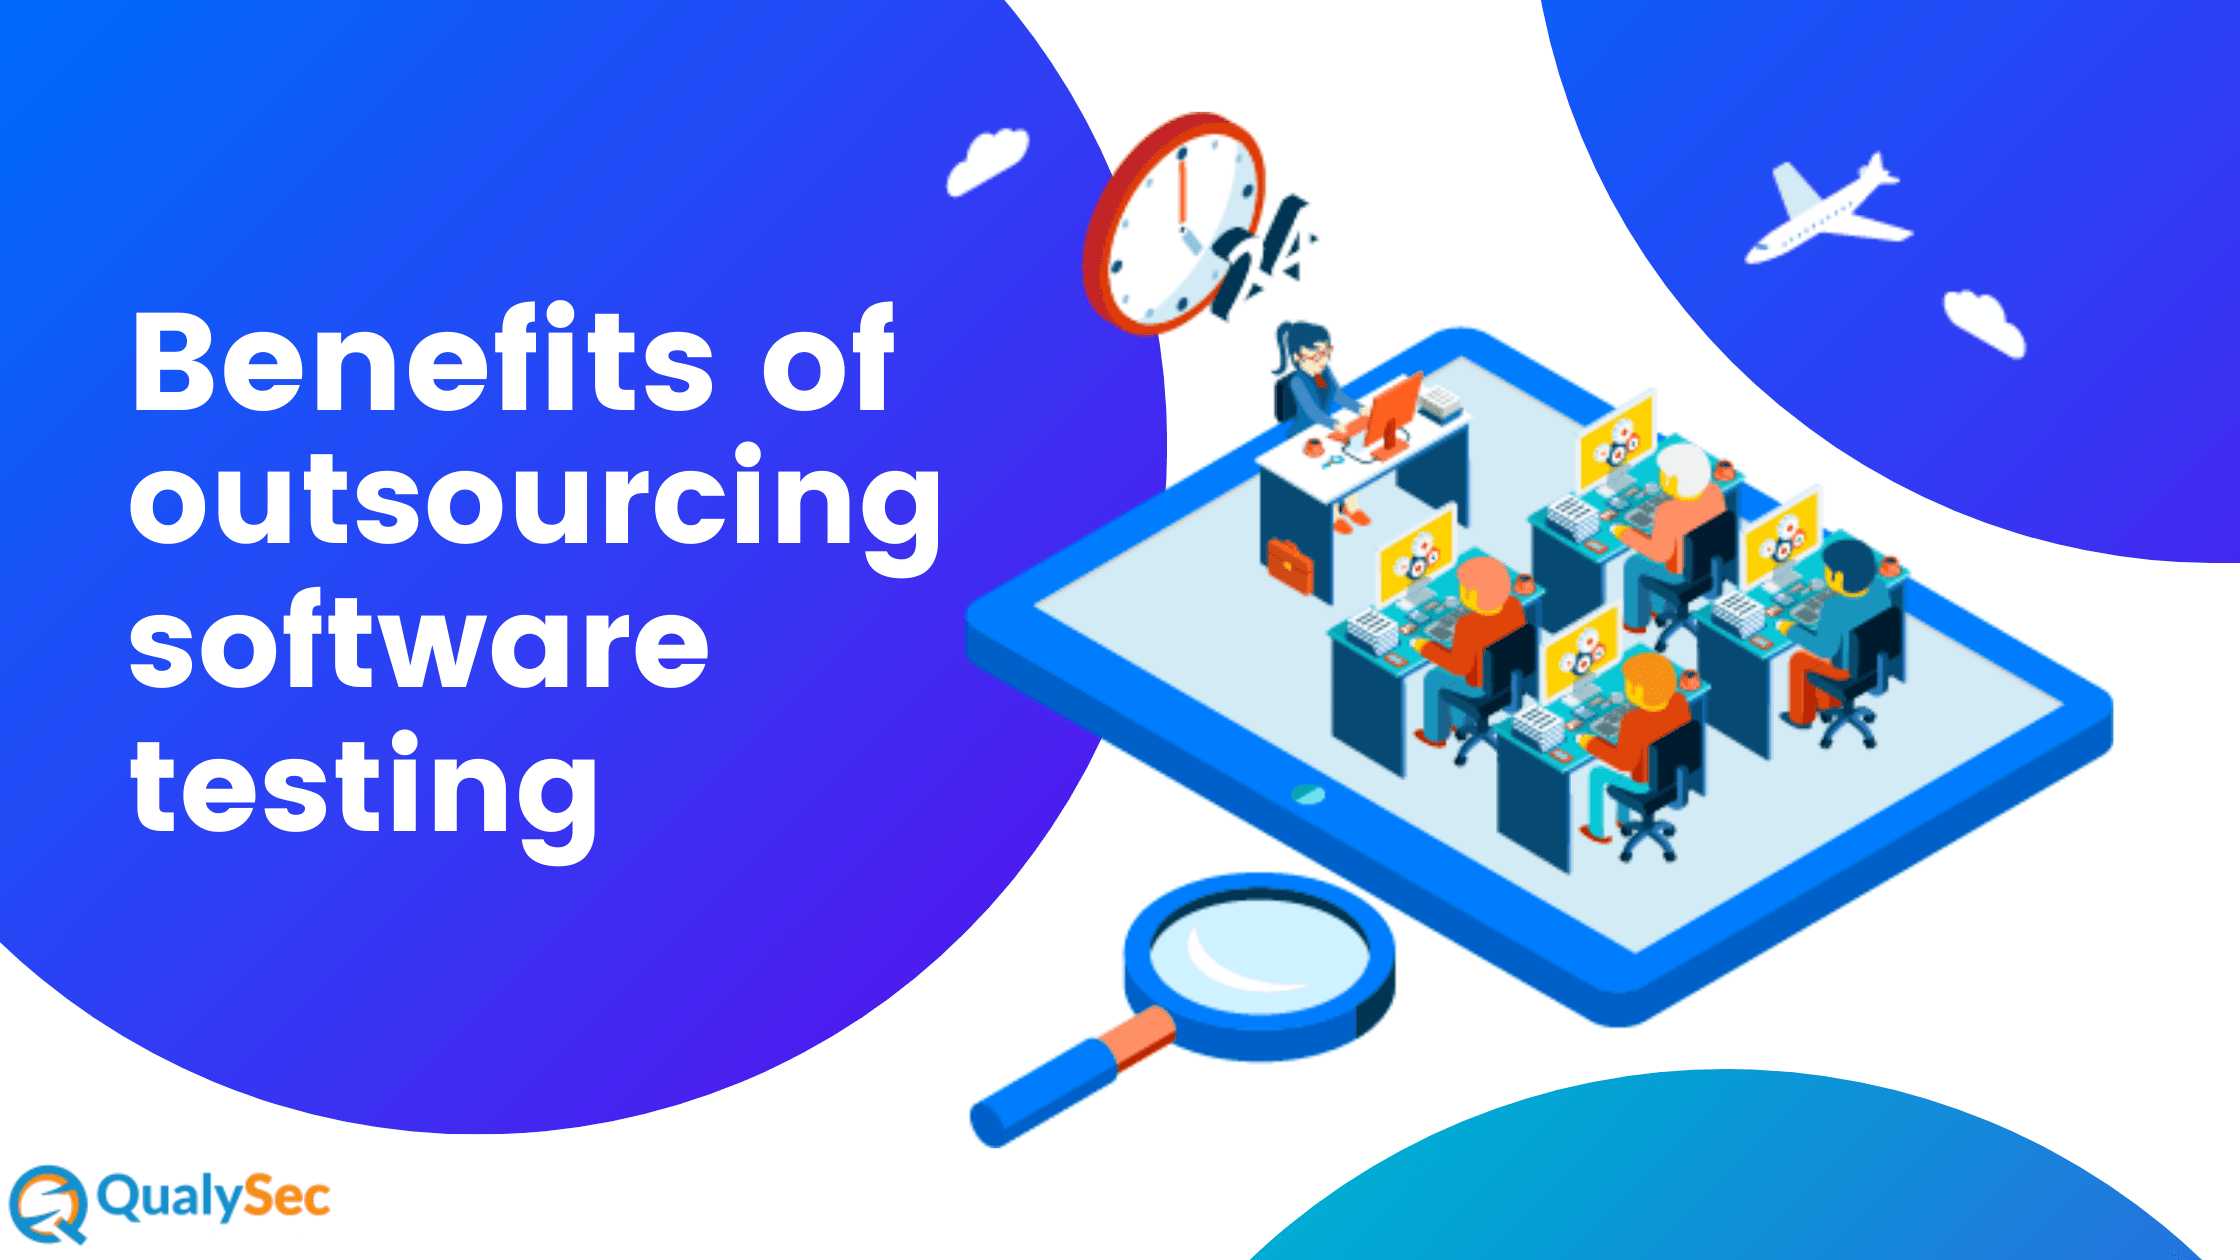 5 Benefits of Outsourcing Software Testing